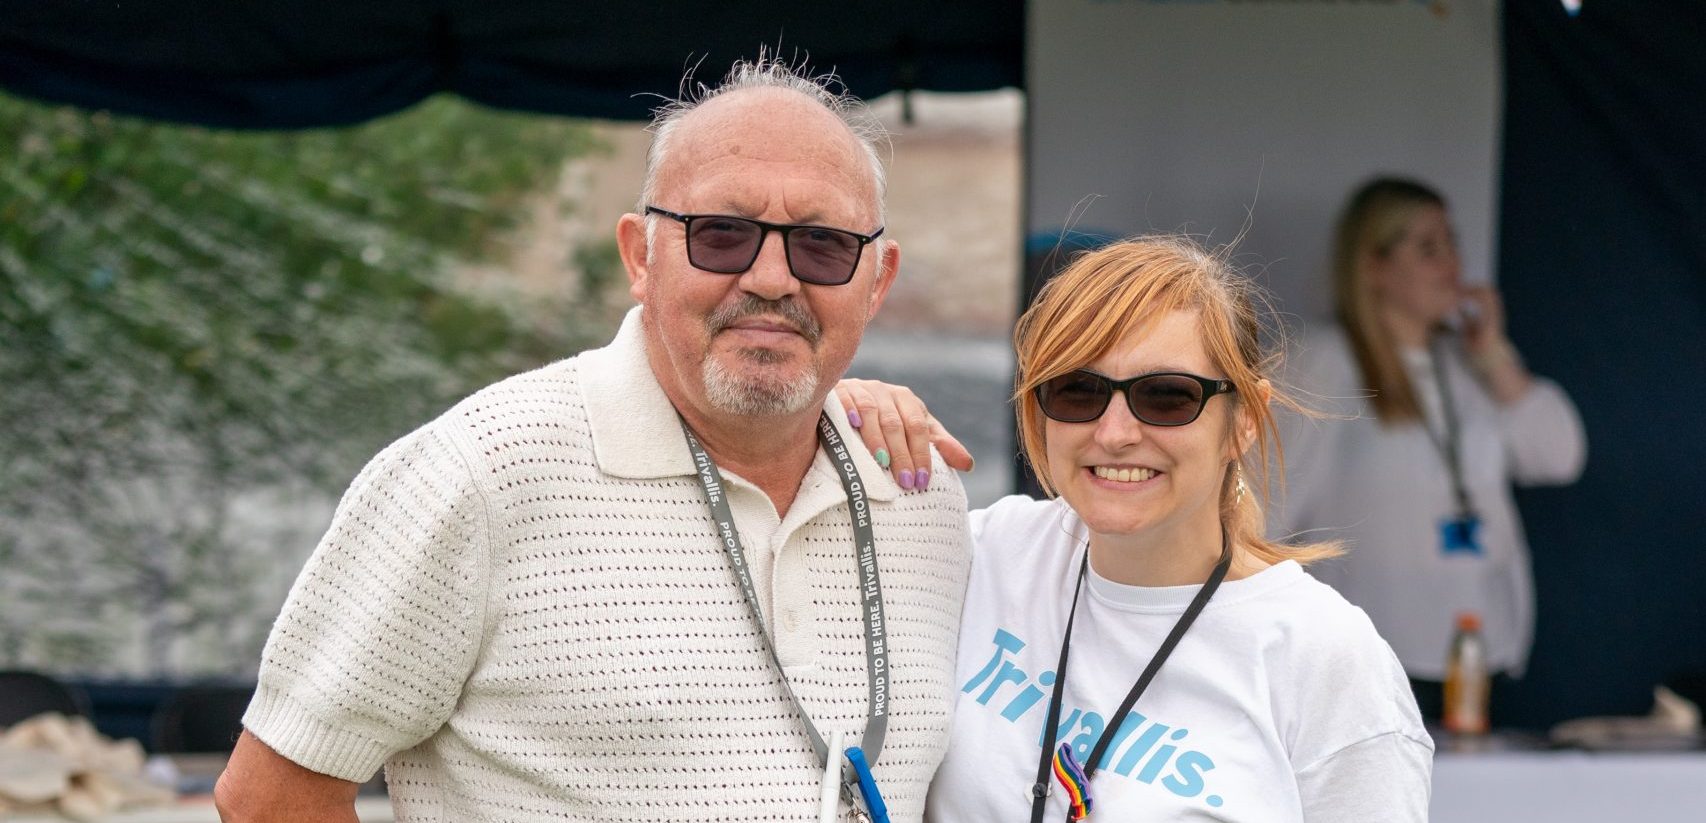 Trivallis Housing Landlord Wales A man and a woman standing outdoors at an event. the man is bald with glasses and wears a white sweater and denim shorts. the woman, in glasses, sports a logo t-shirt and denim shorts. both smile at the camera.